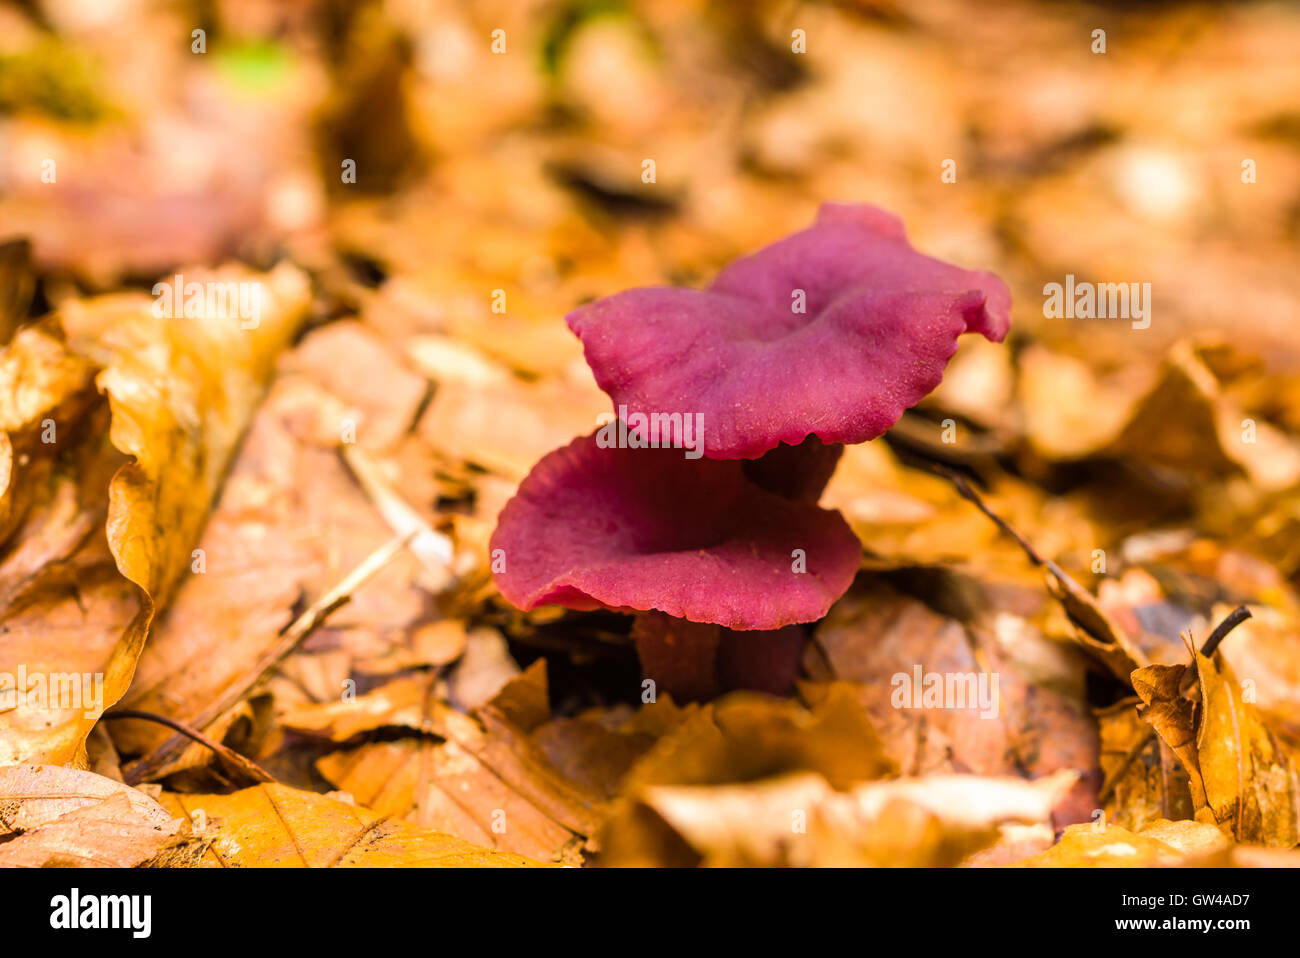 Two amethyst deceiver (Laccaria amethystine) mushrooms on the beech forest floor. Stock Photo